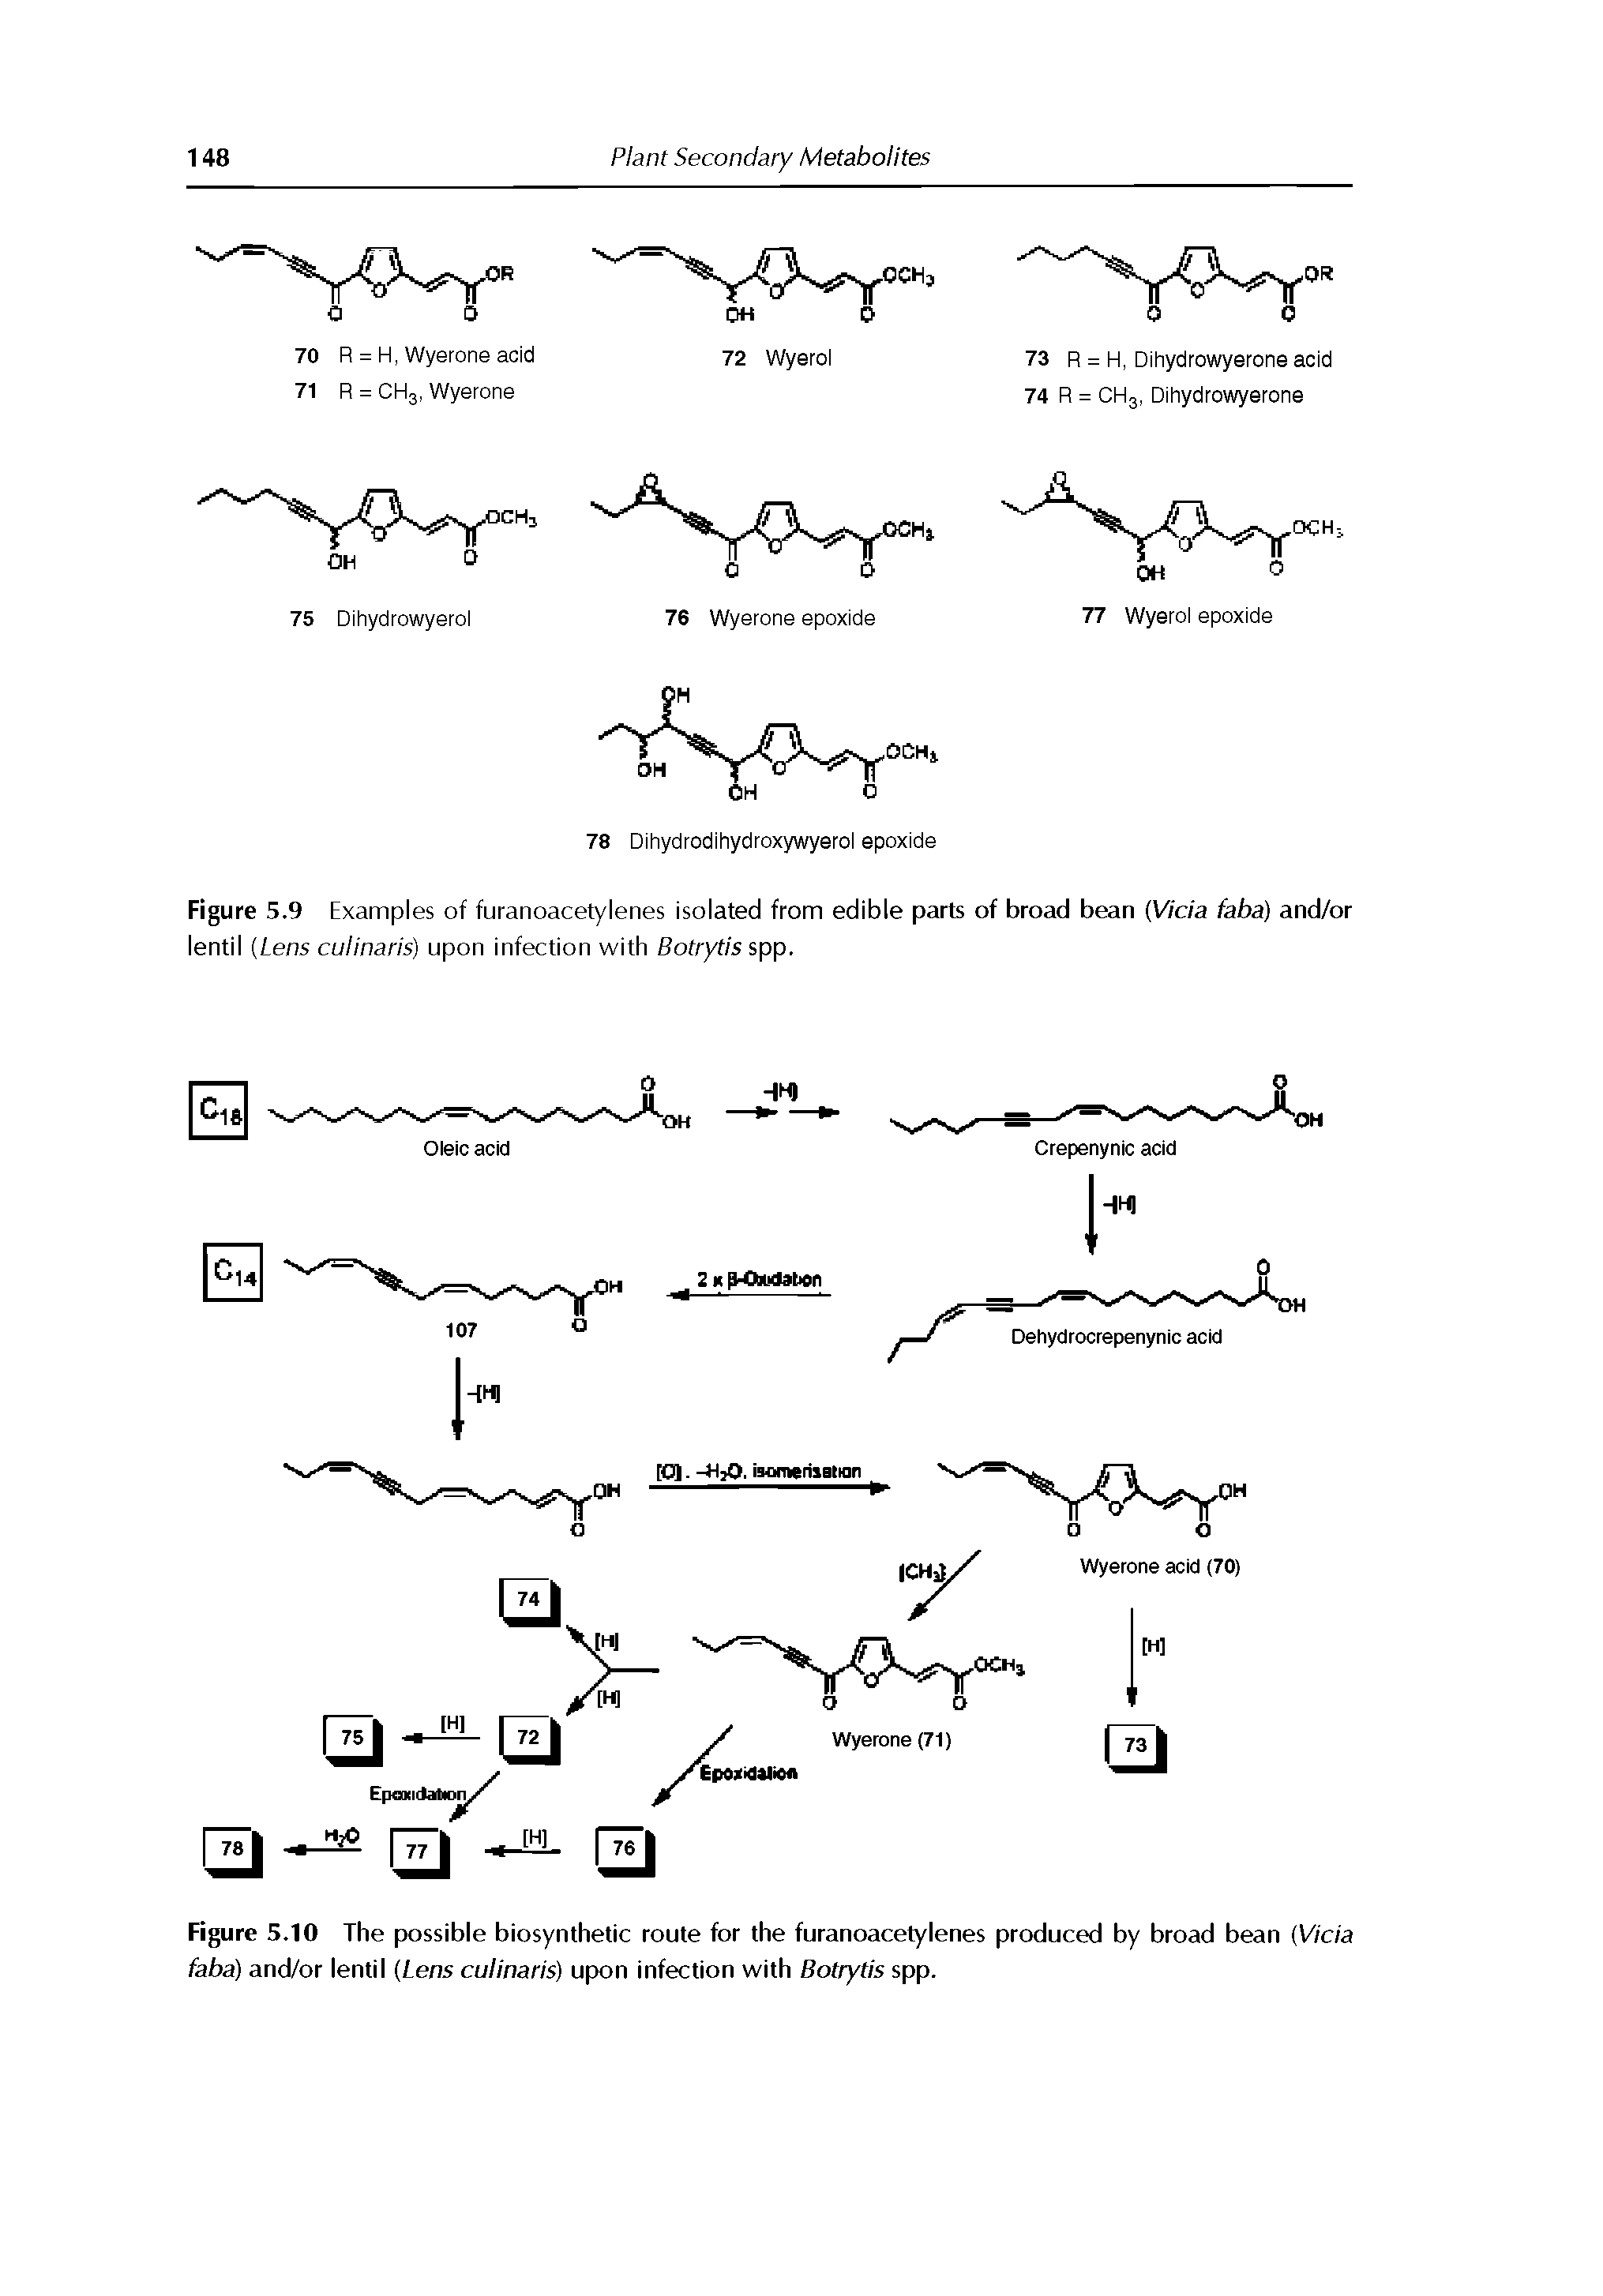 Figure 5.9 Examples of furanoacetylenes isolated from edible parts of broad bean (V/c/a faba) and/or lentil [Lens culinaris) upon infection with Botrytis spp.